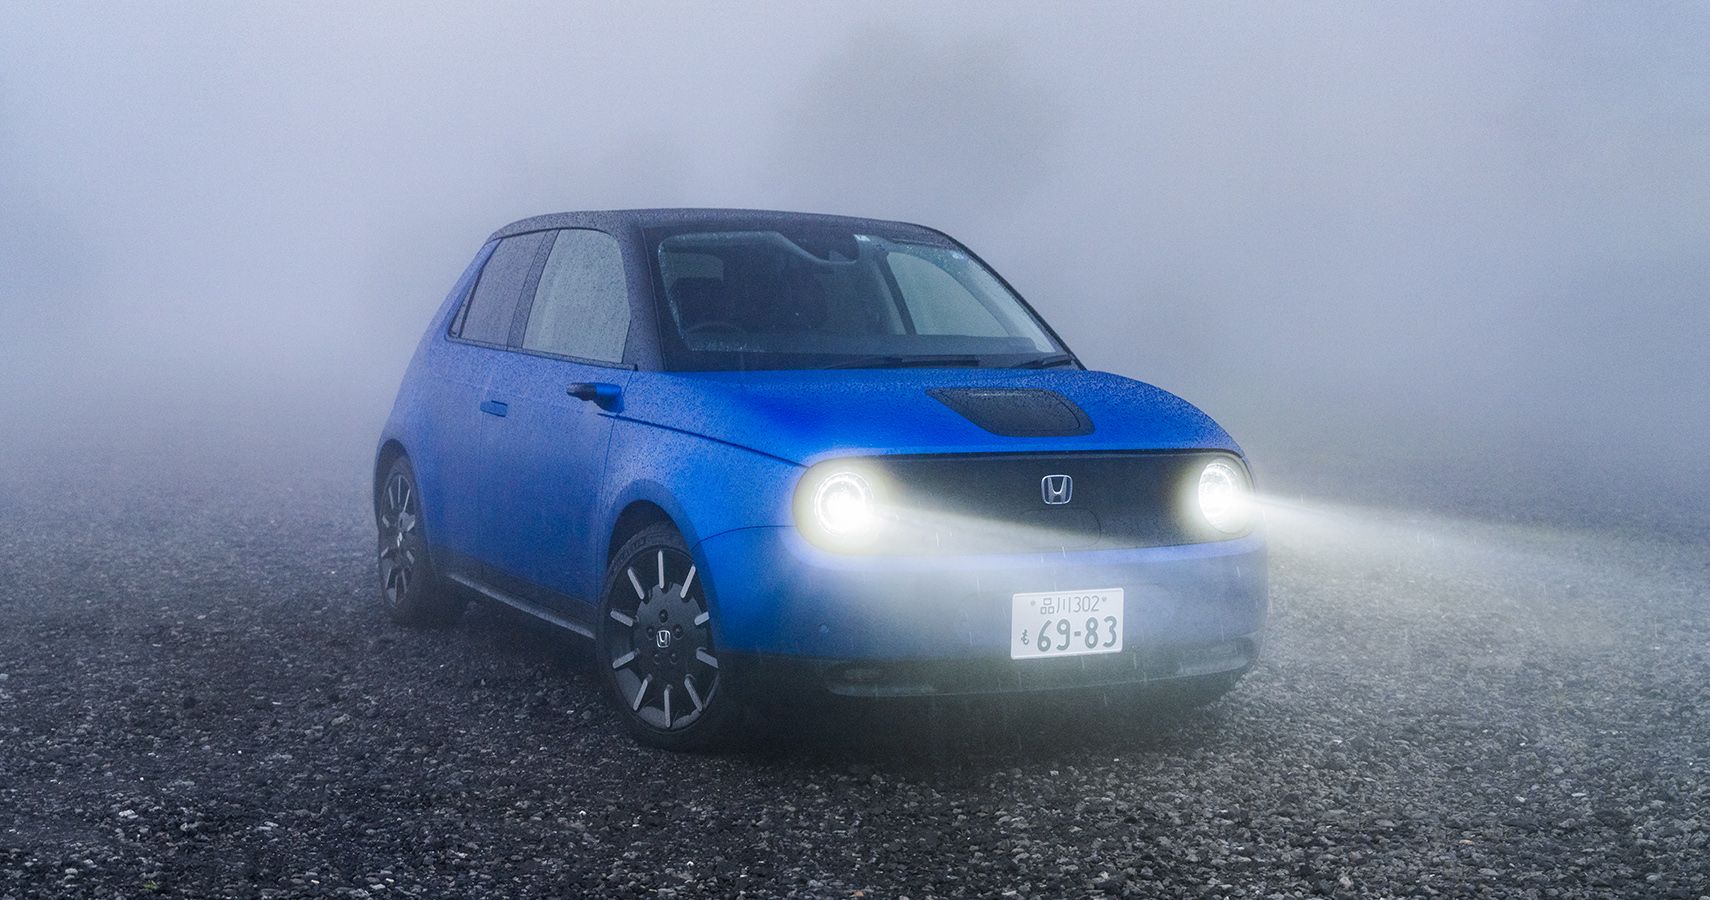 Front 3/4 Honda e in misty weather